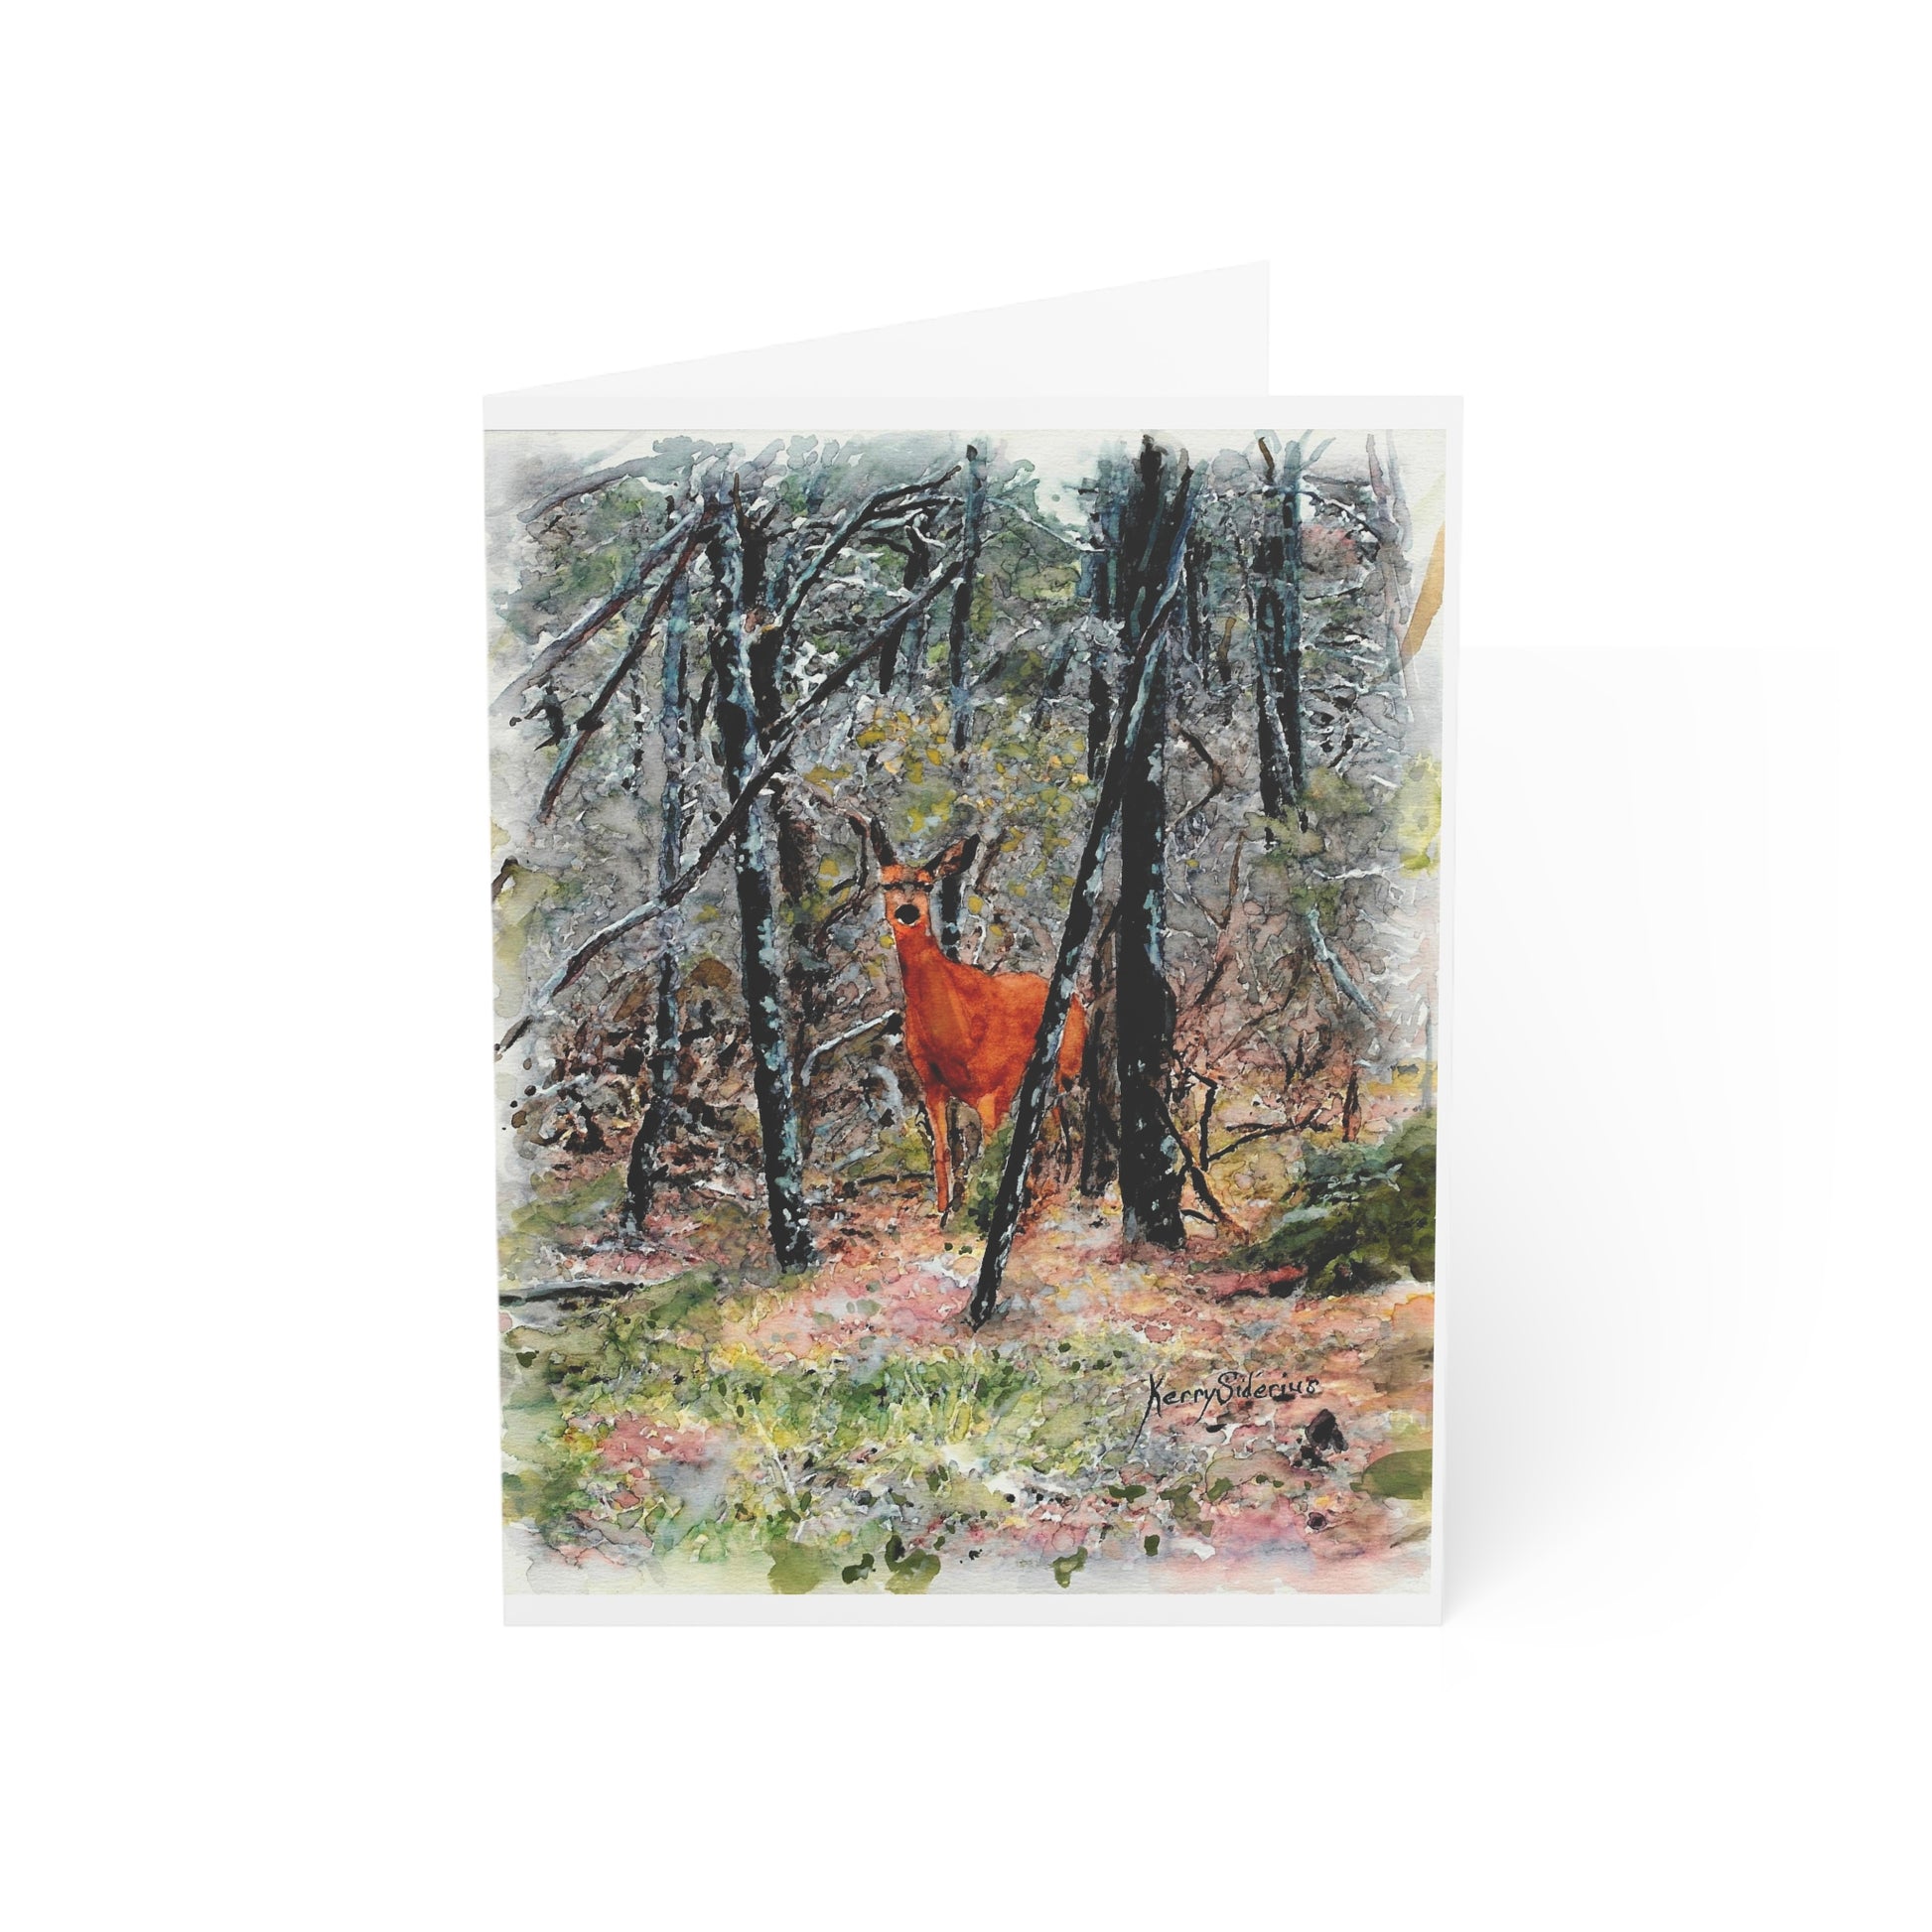 "New Growth in Last Year's Burn" Greeting Cards - Kerry Siderius Art 